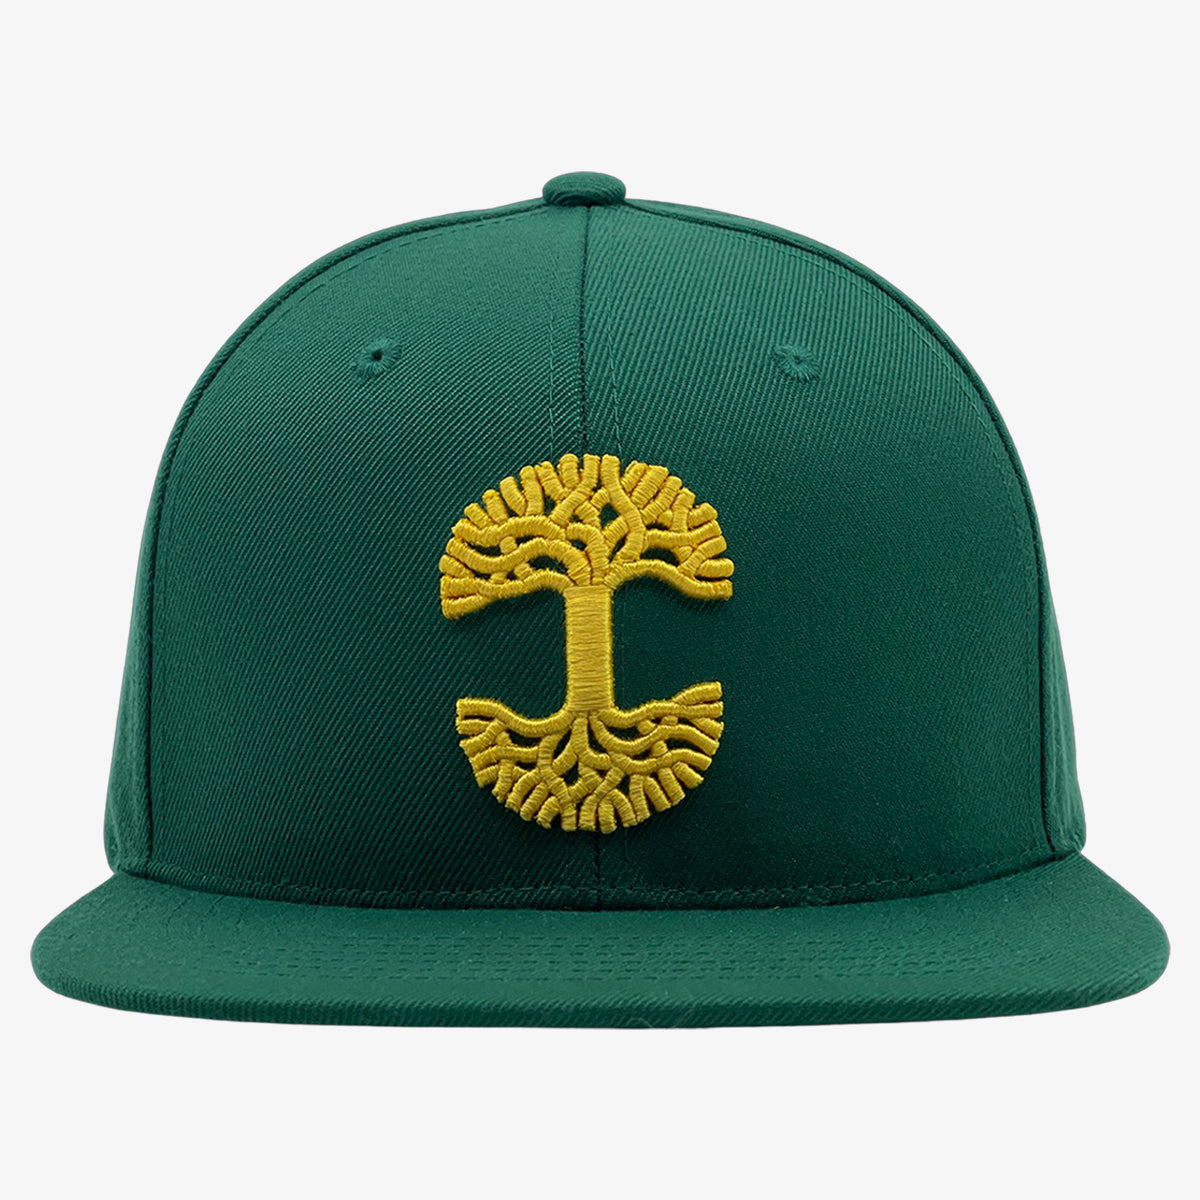 Forest green cap with gold embroidered Oaklandish tree logo on the front.